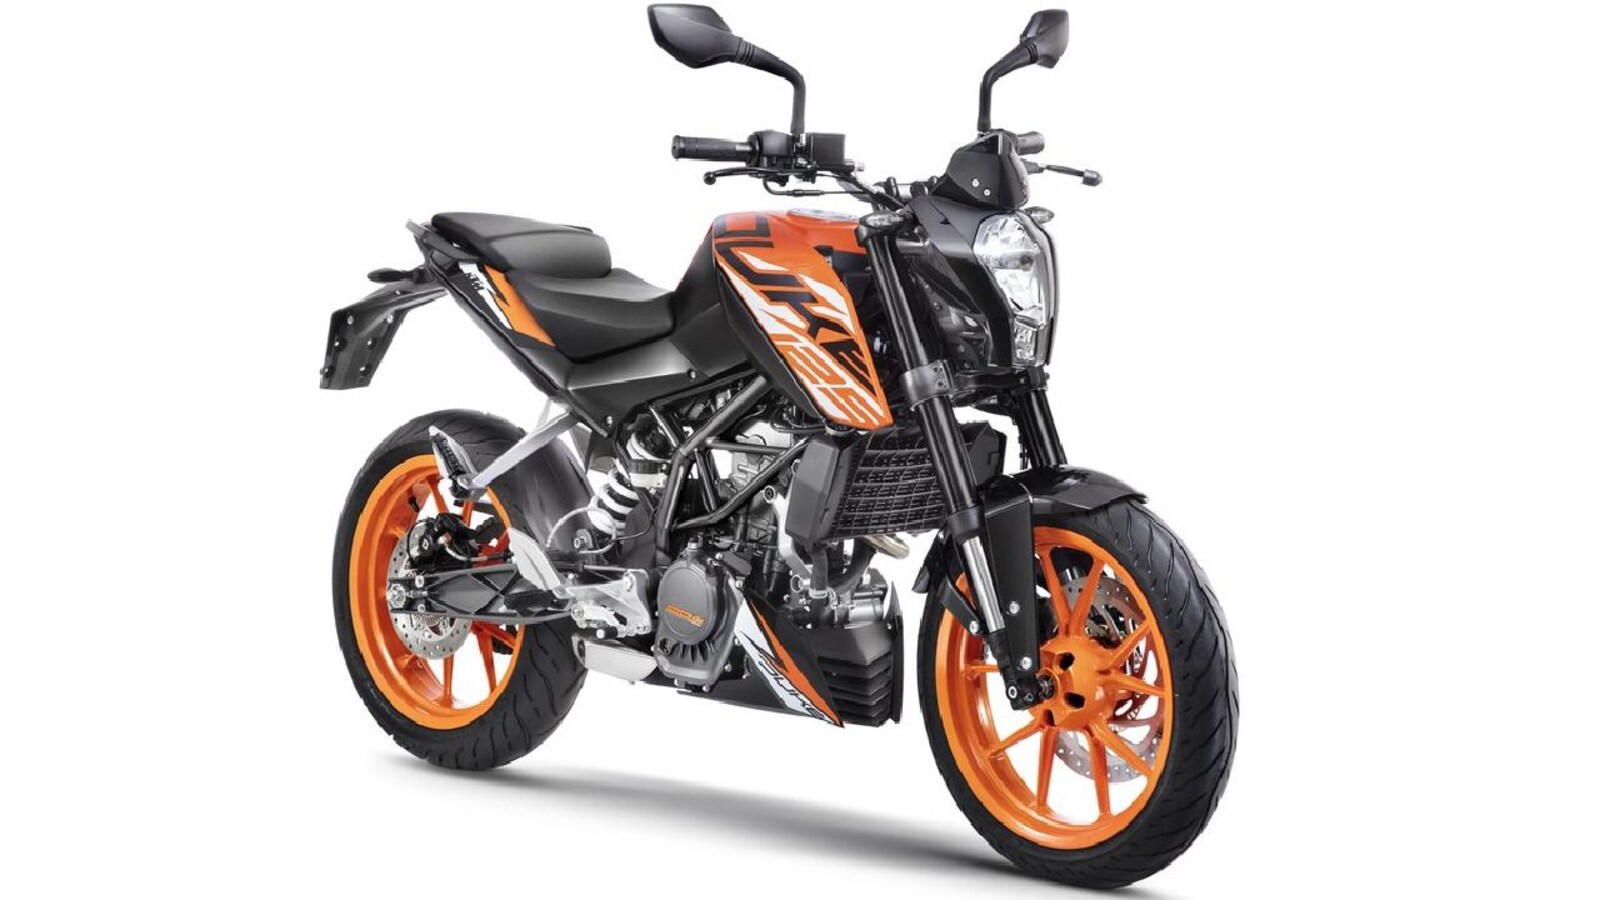 KTM Duke 125 finally rolls into India with a price tag of Rs 1.18 lakh